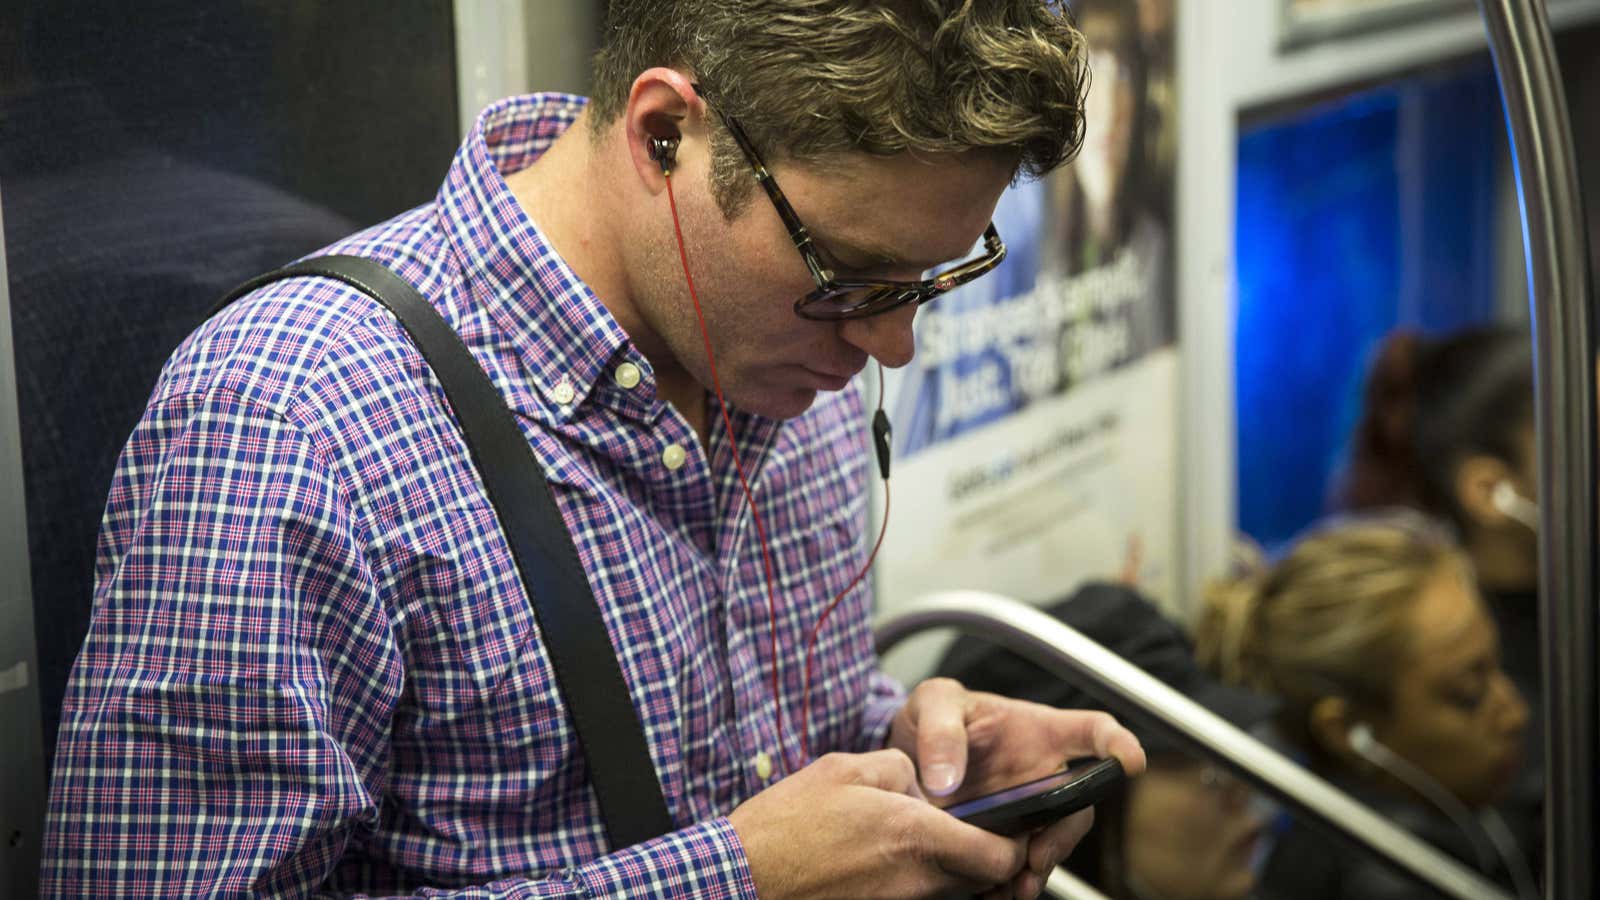 News apps would be better if publishers knew more about his reading habits underground.